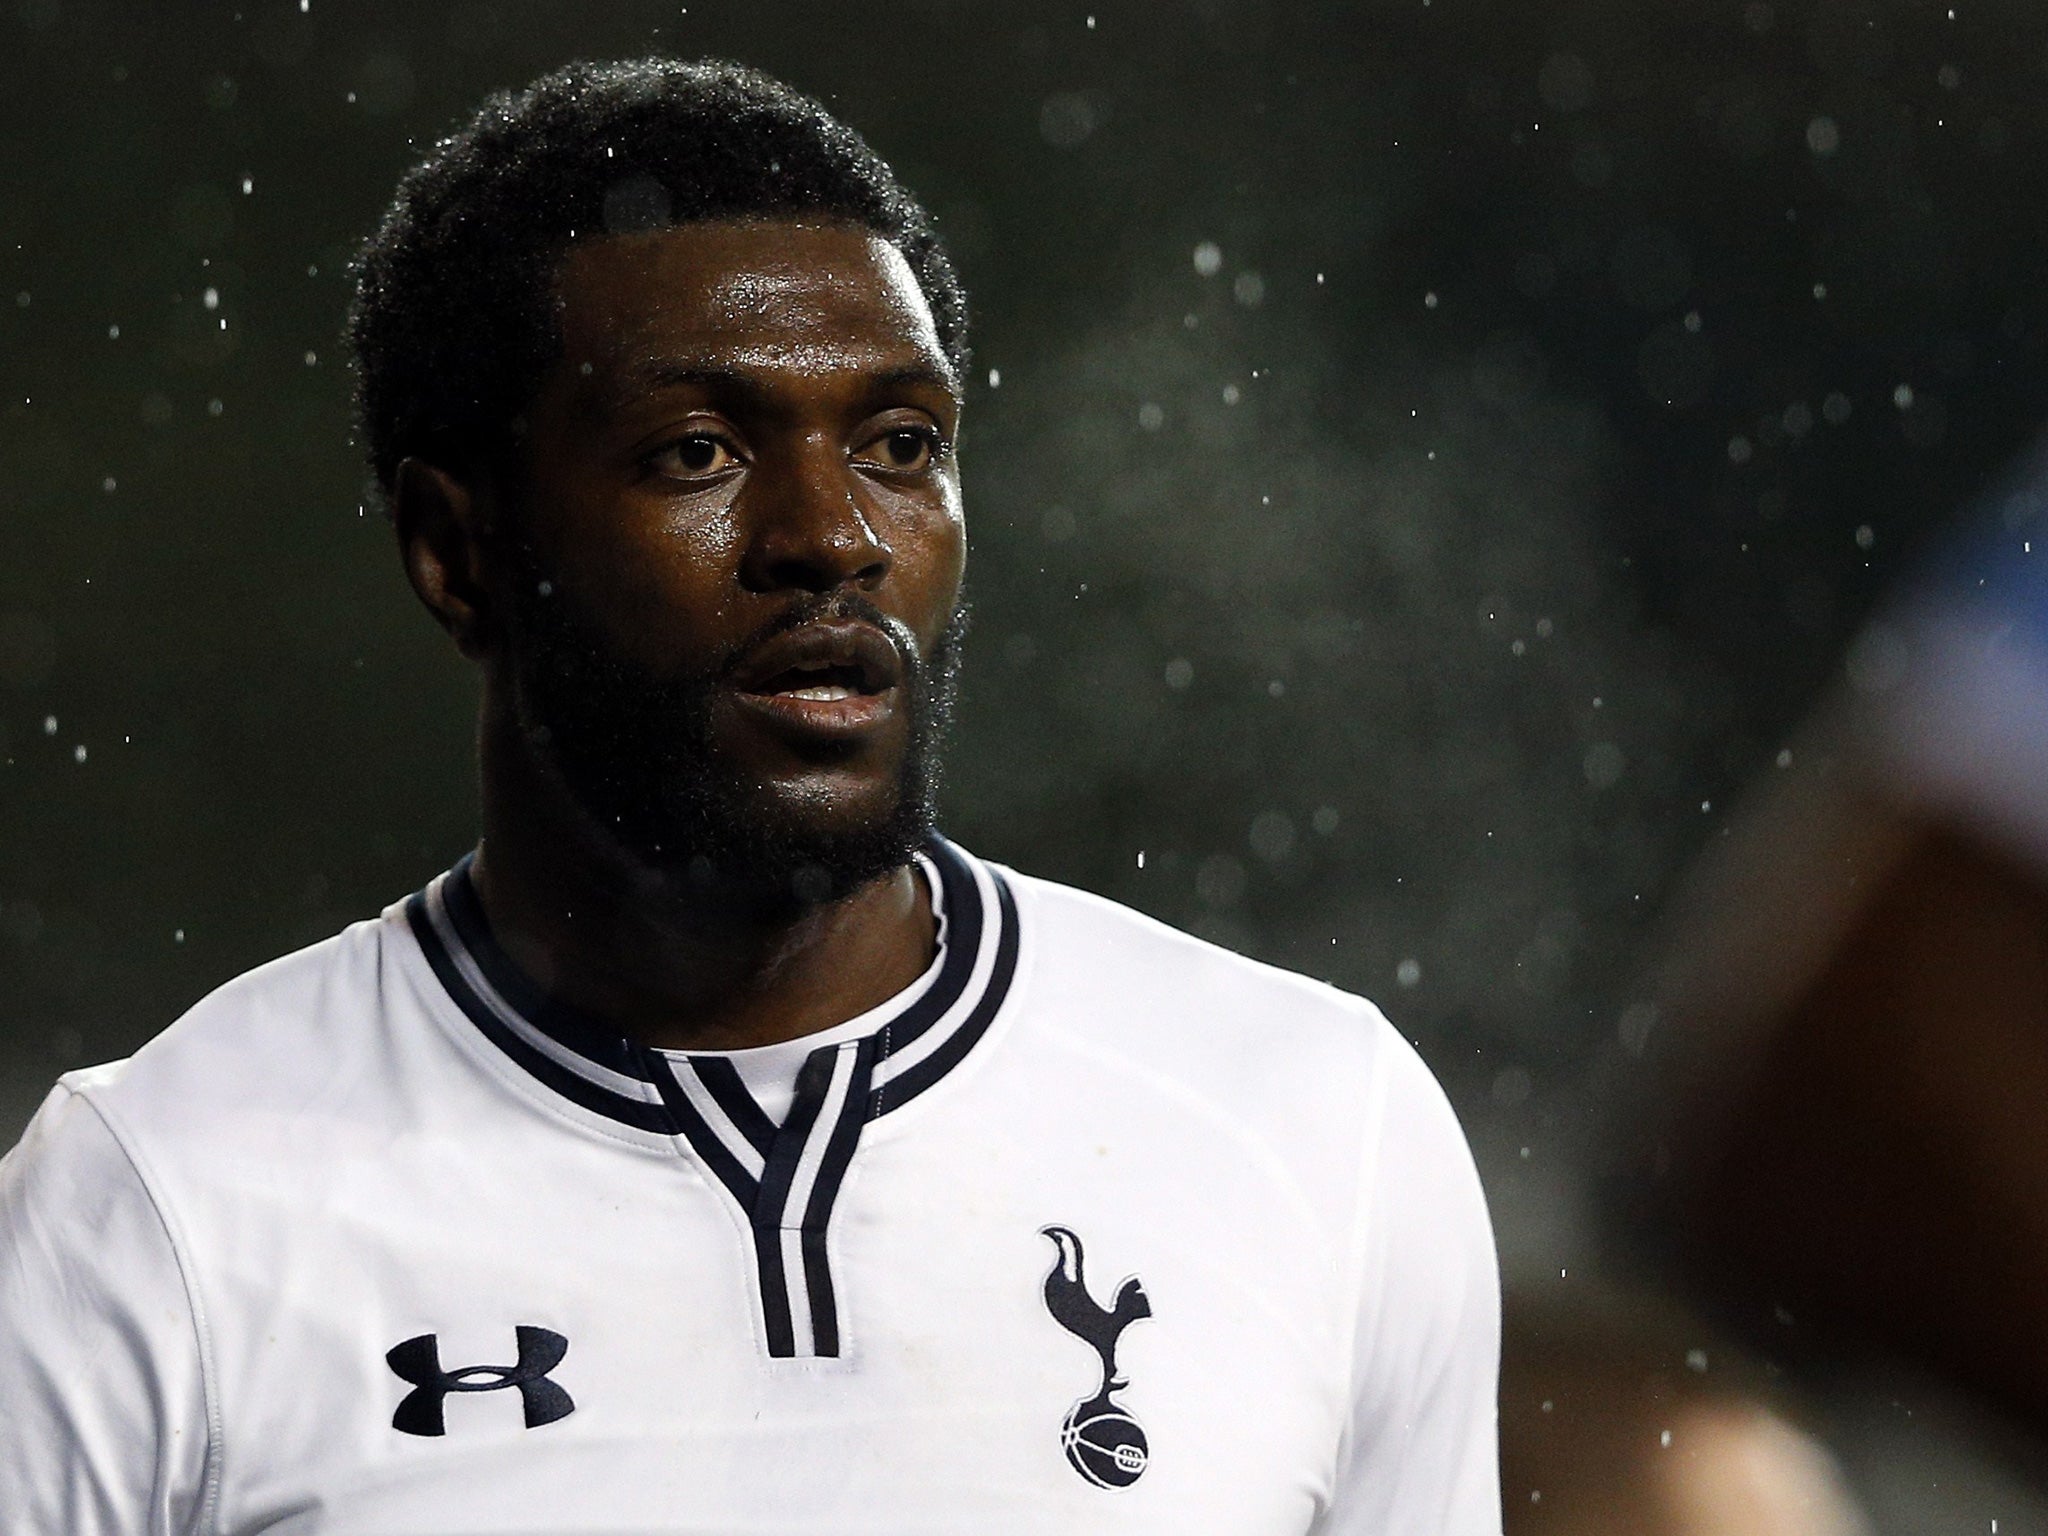 Adebayor says arguments with his brothers got so bad they drove him to consider taking his own life